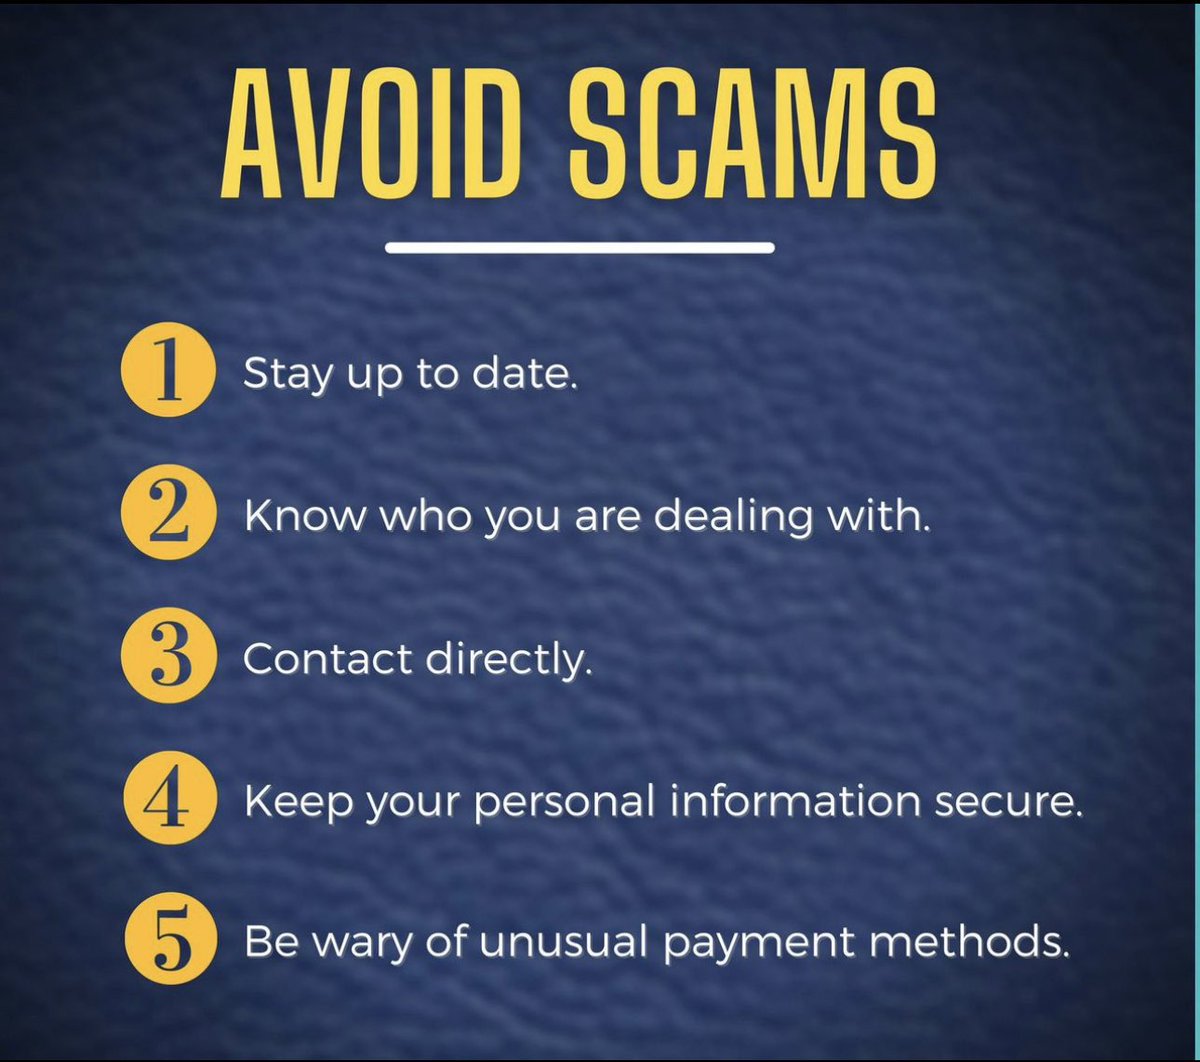 Don’t fall prey to scammers or hackers, keep your details safe.